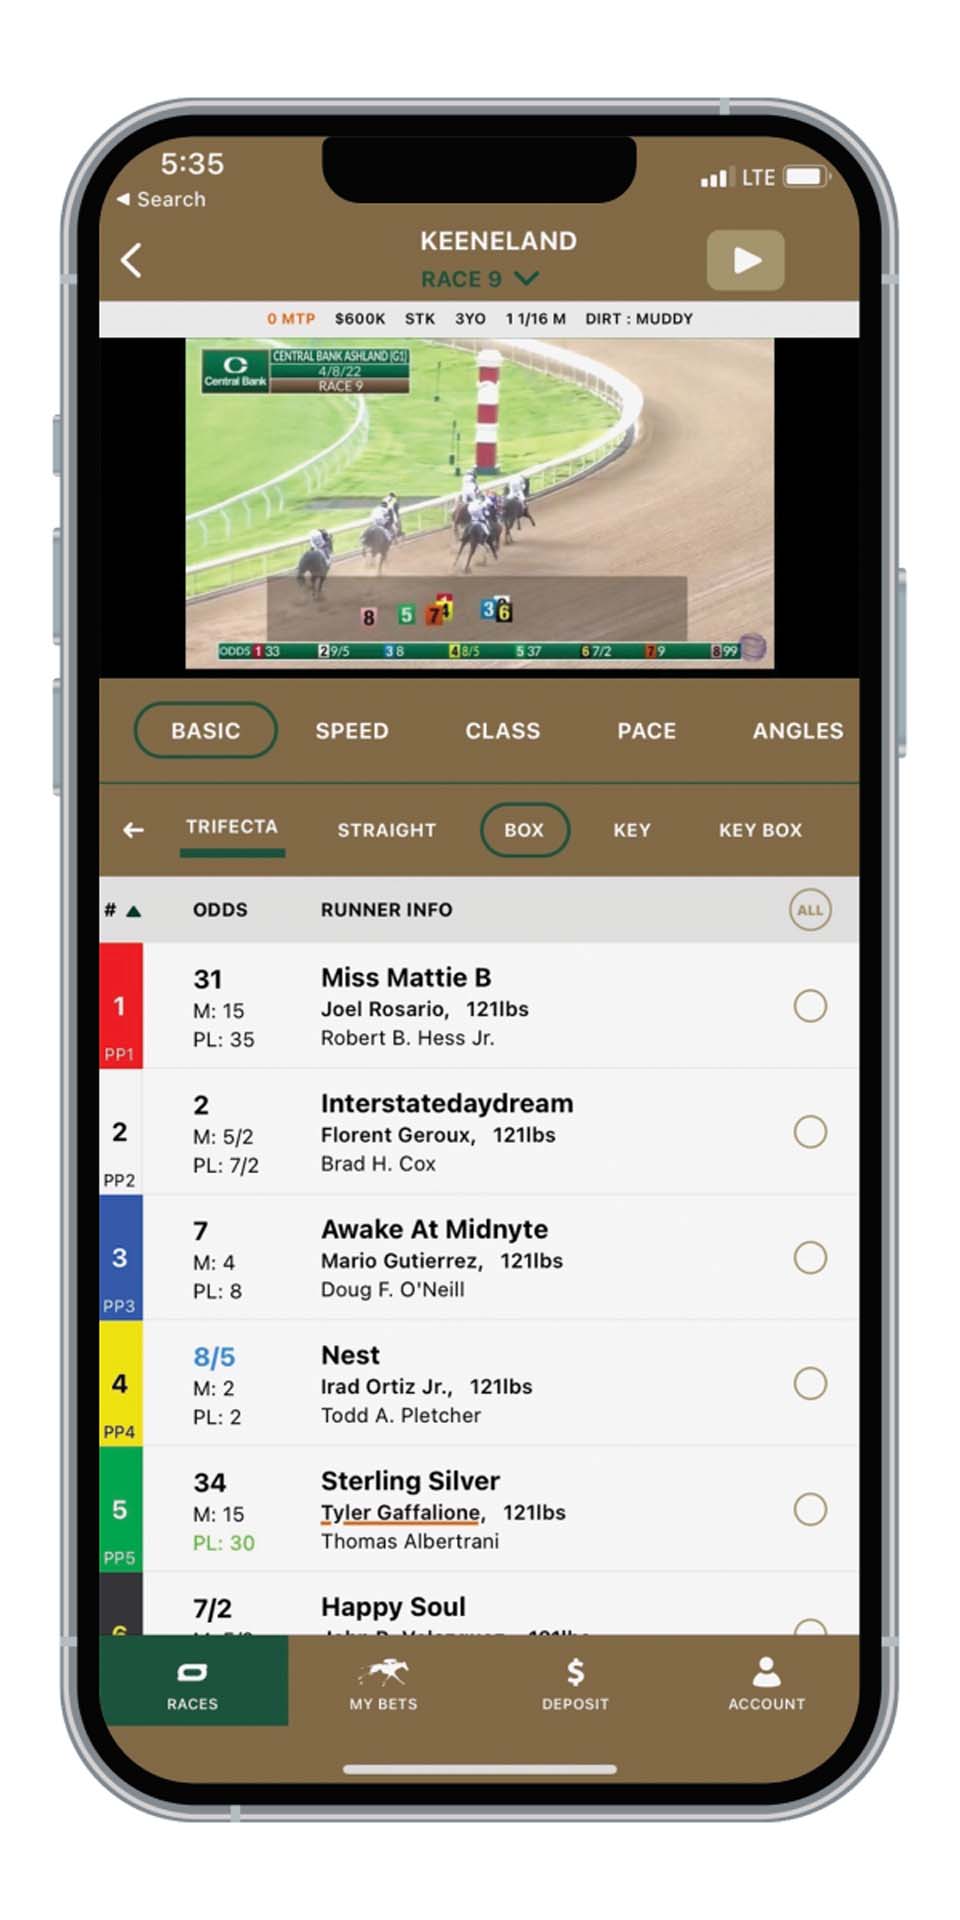 A screenshot of a Live Video on the Keeneland Select App